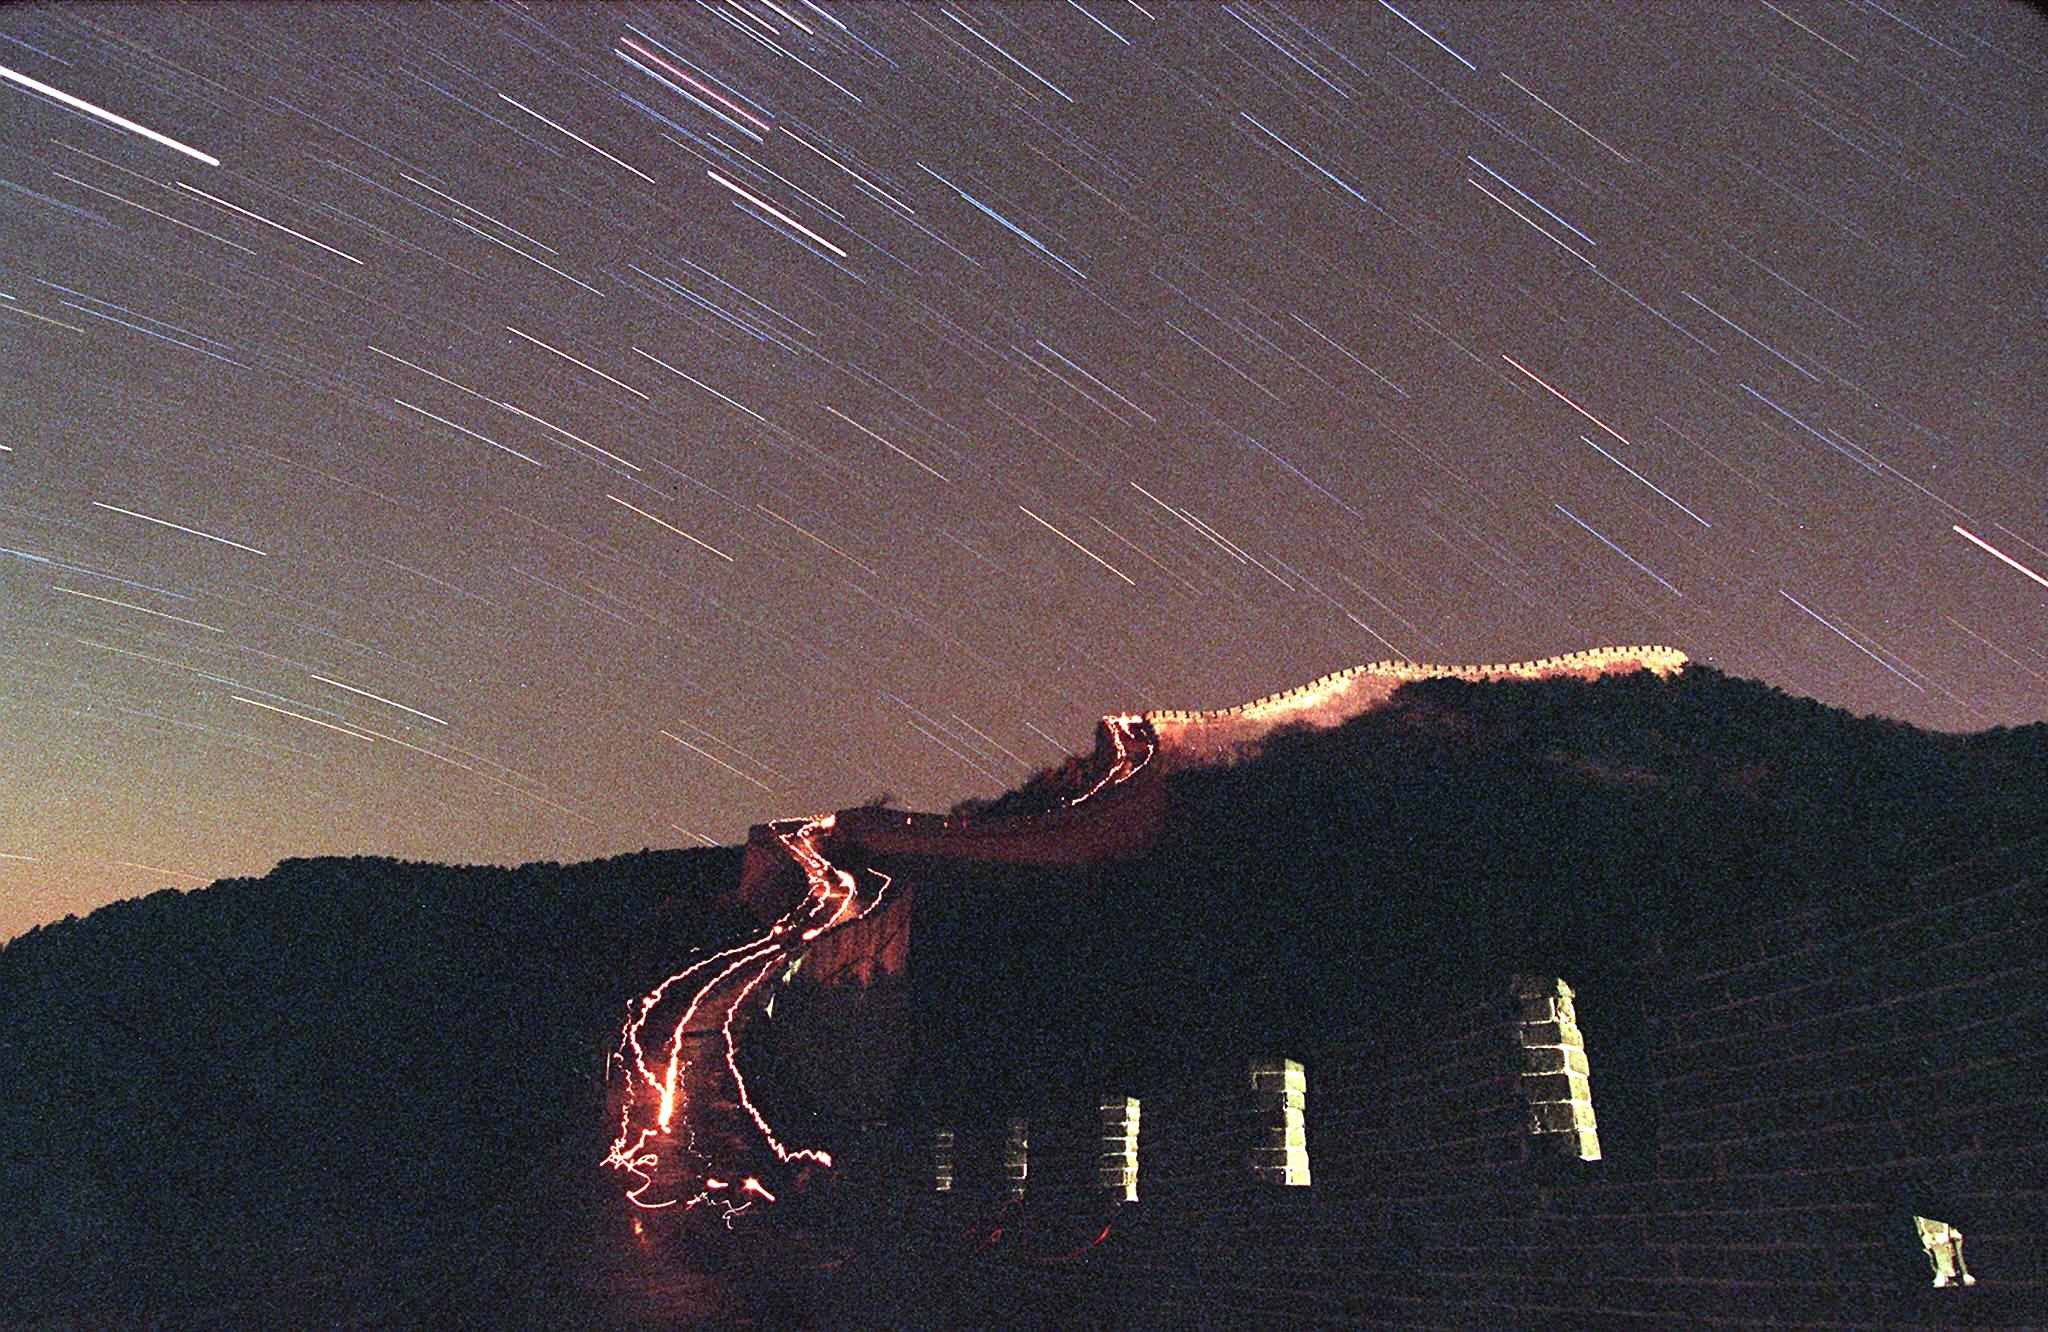 The Leonid meteor shower lights up the sky above China's Great Wall as stargazers brave the minus 20 degrees Celcius. (STEPHEN SHAVER—AFP/Getty Images)